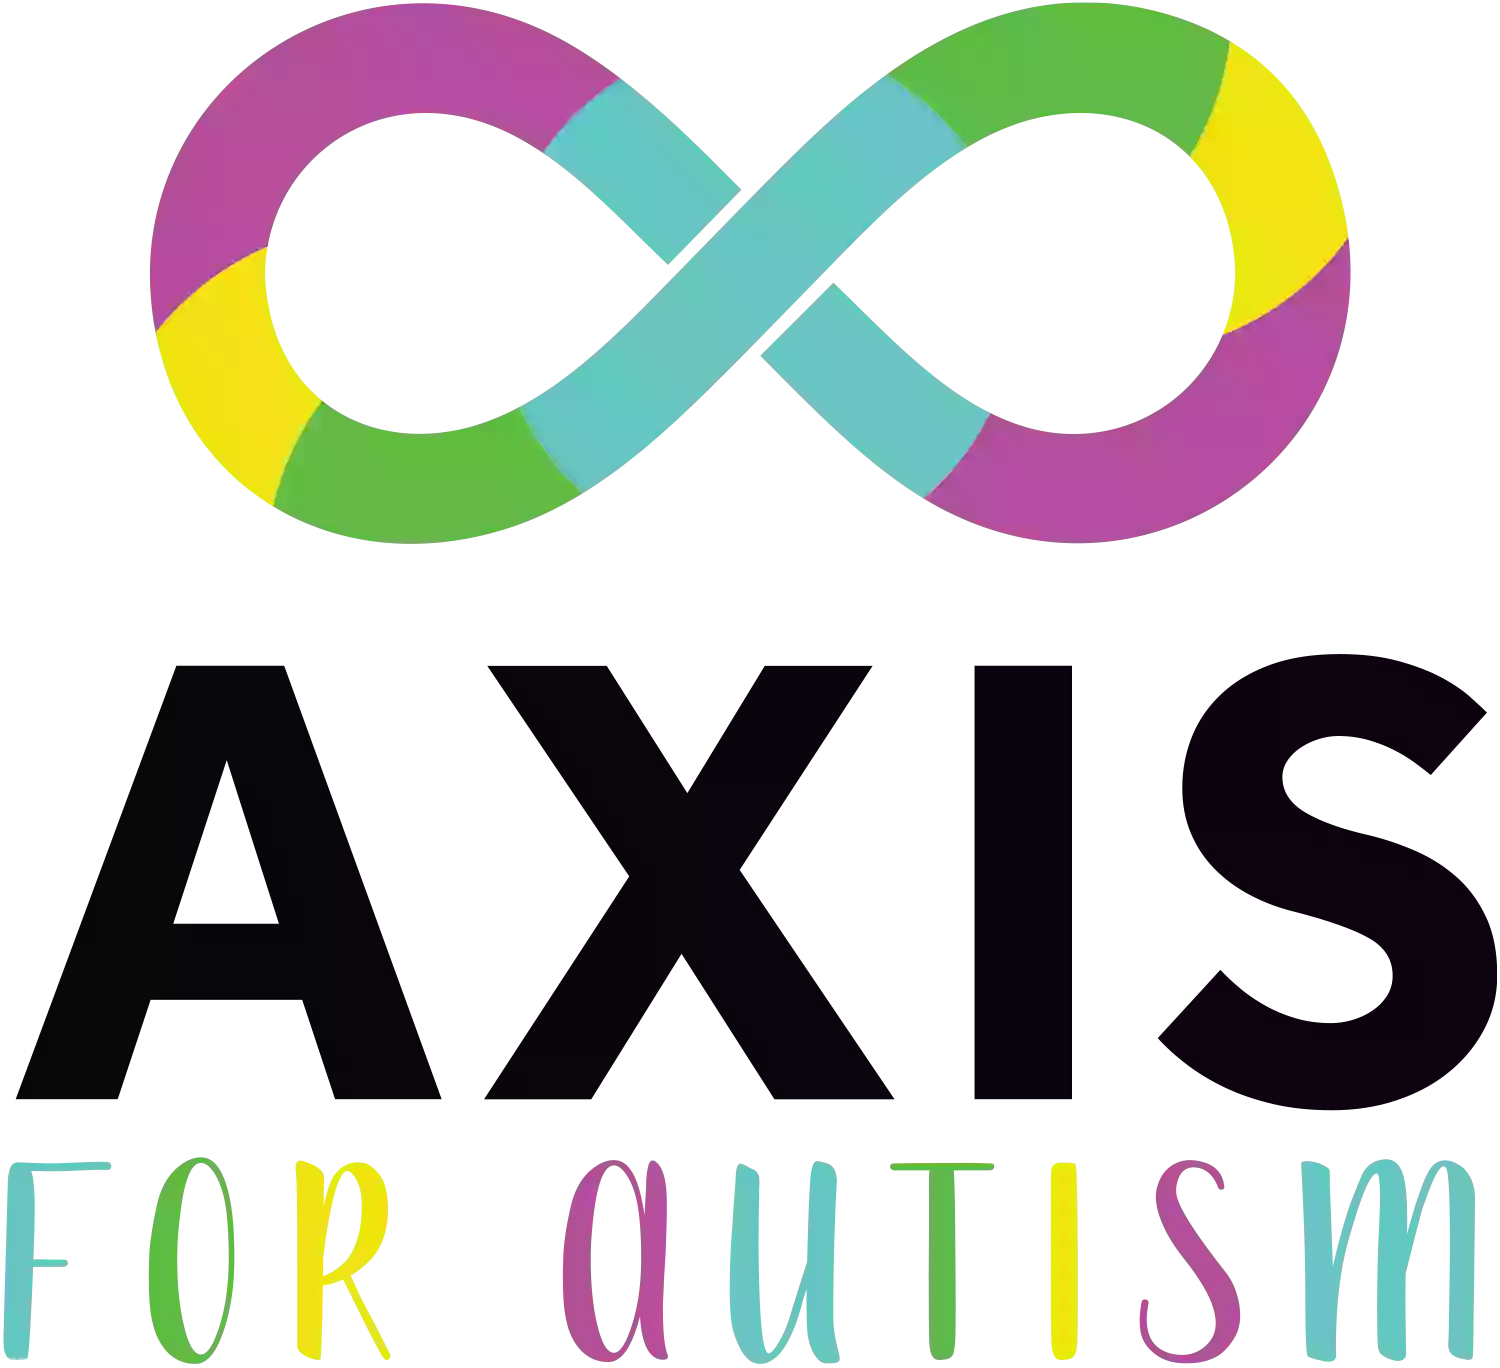 Axis for Autism